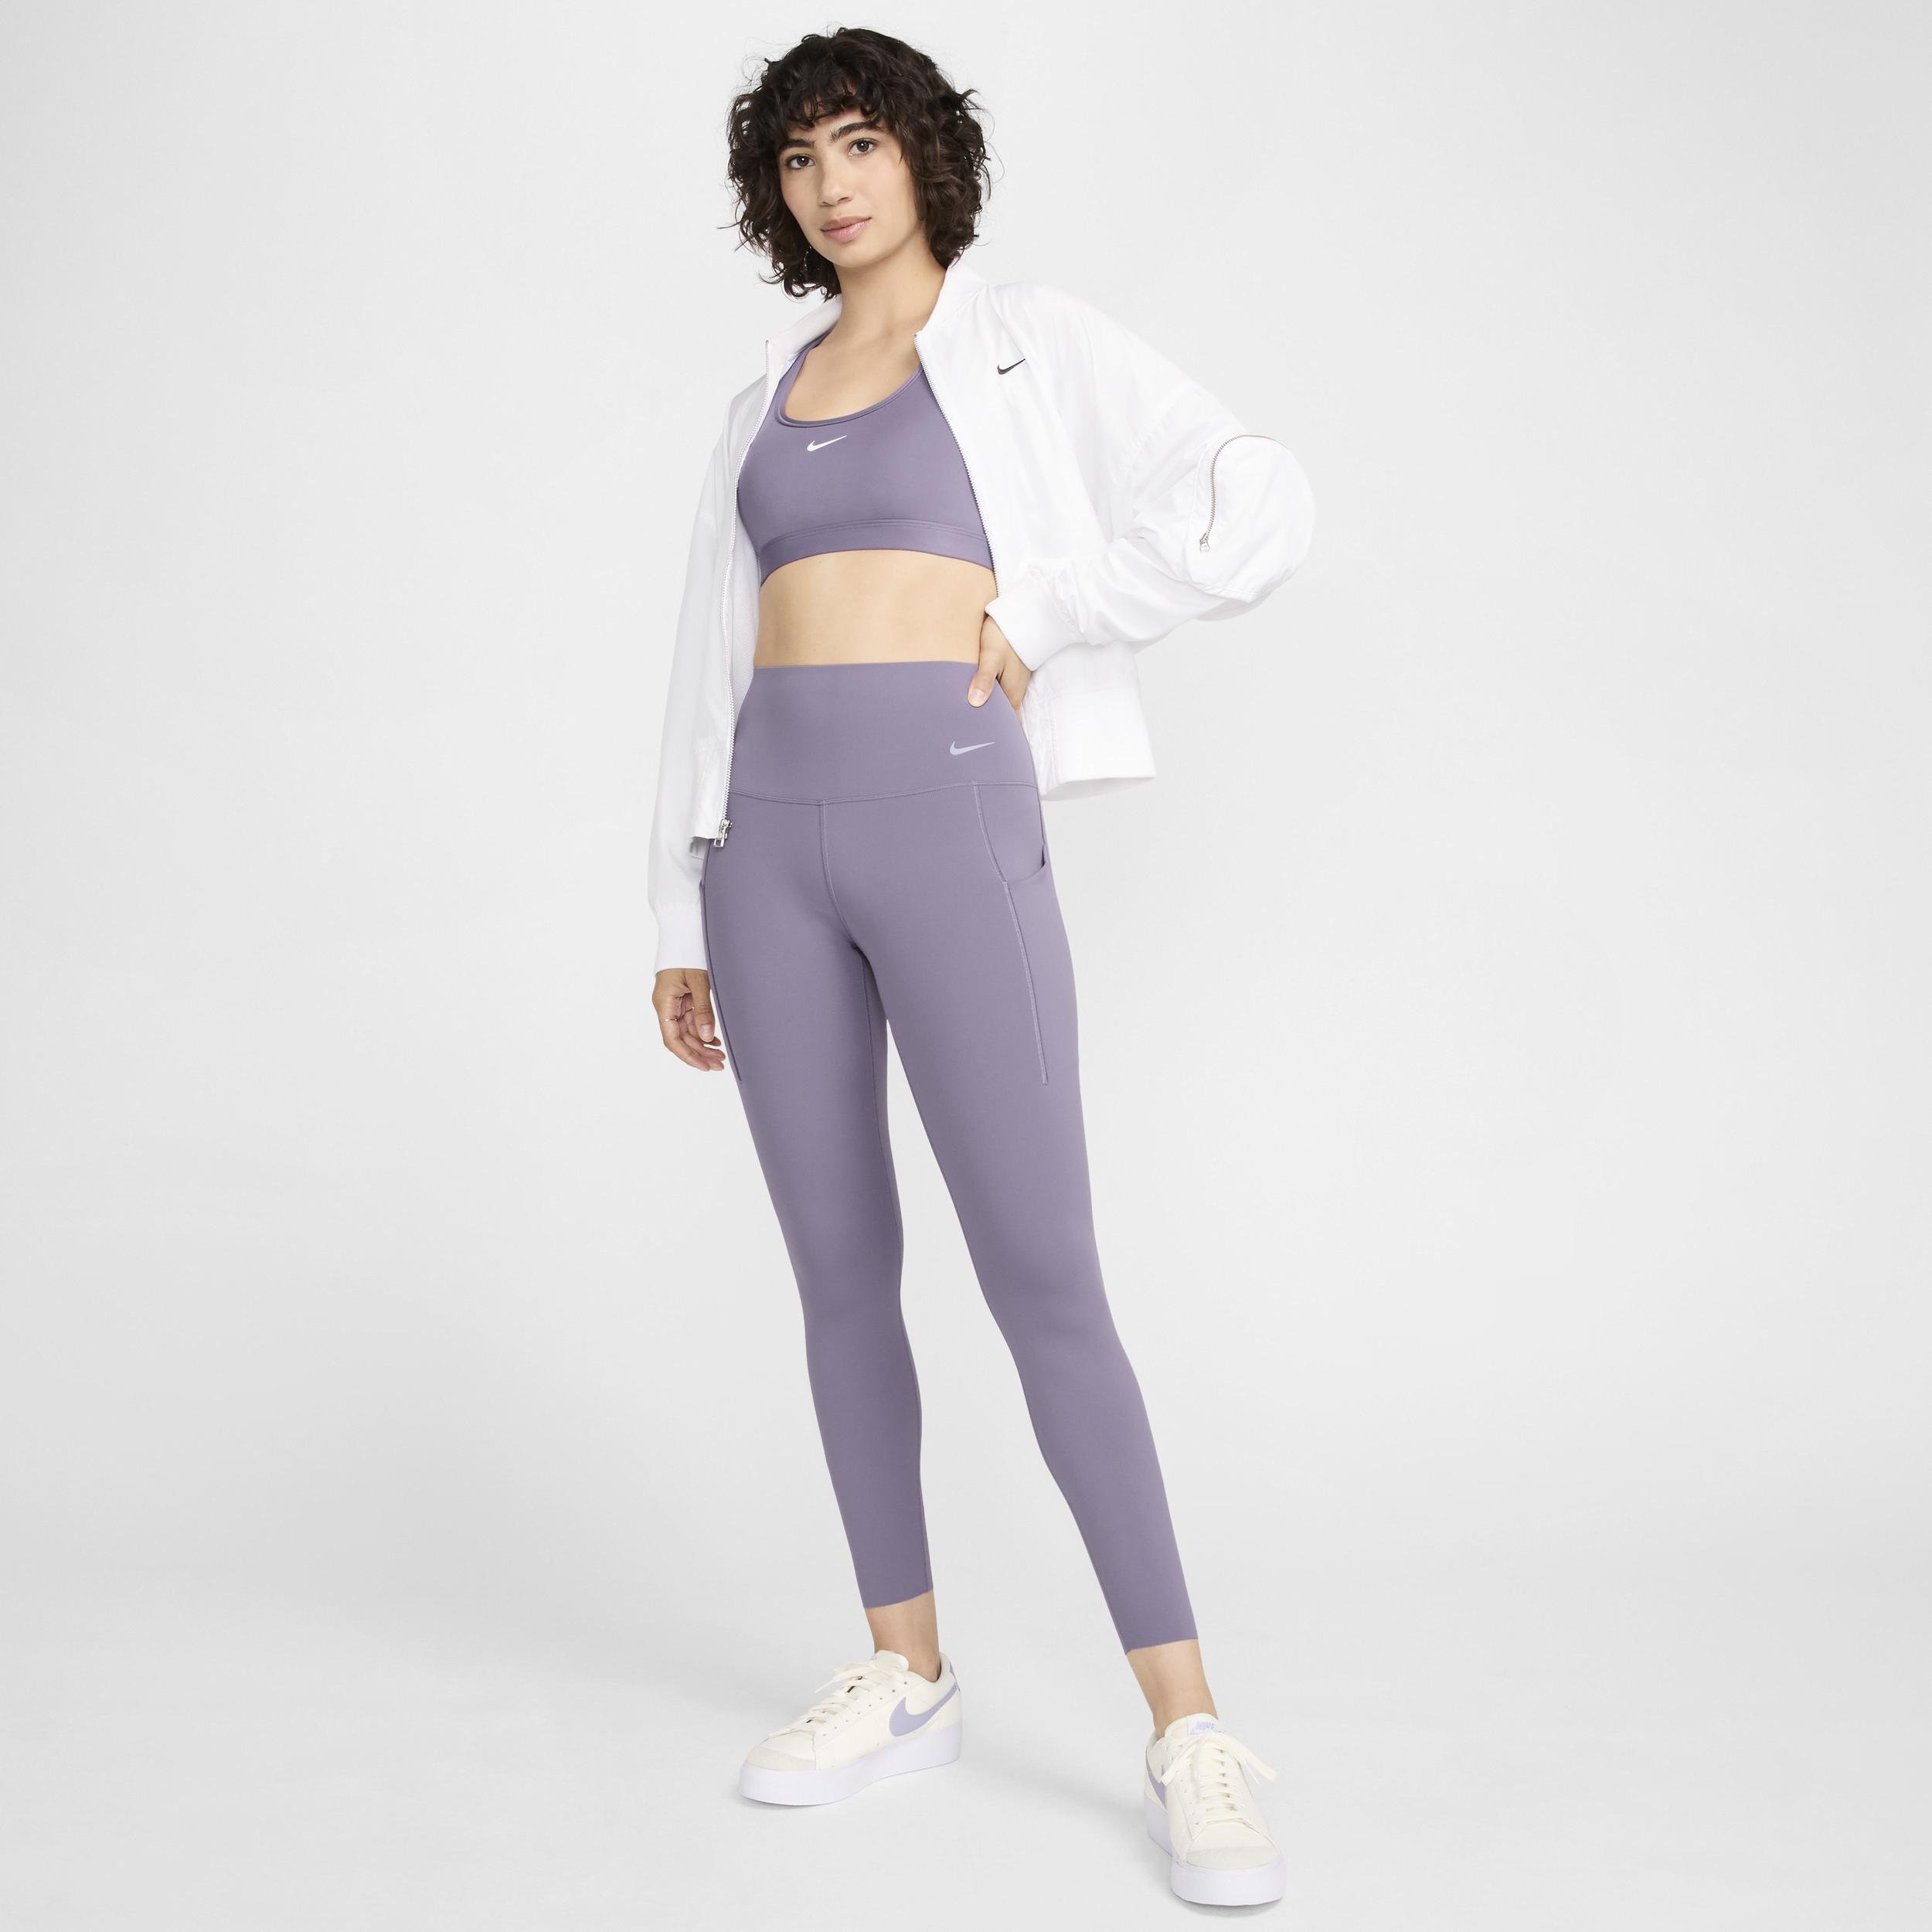 Nike Women's Universa Medium-Support High-Waisted 7/8 Leggings with Pockets by NIKE